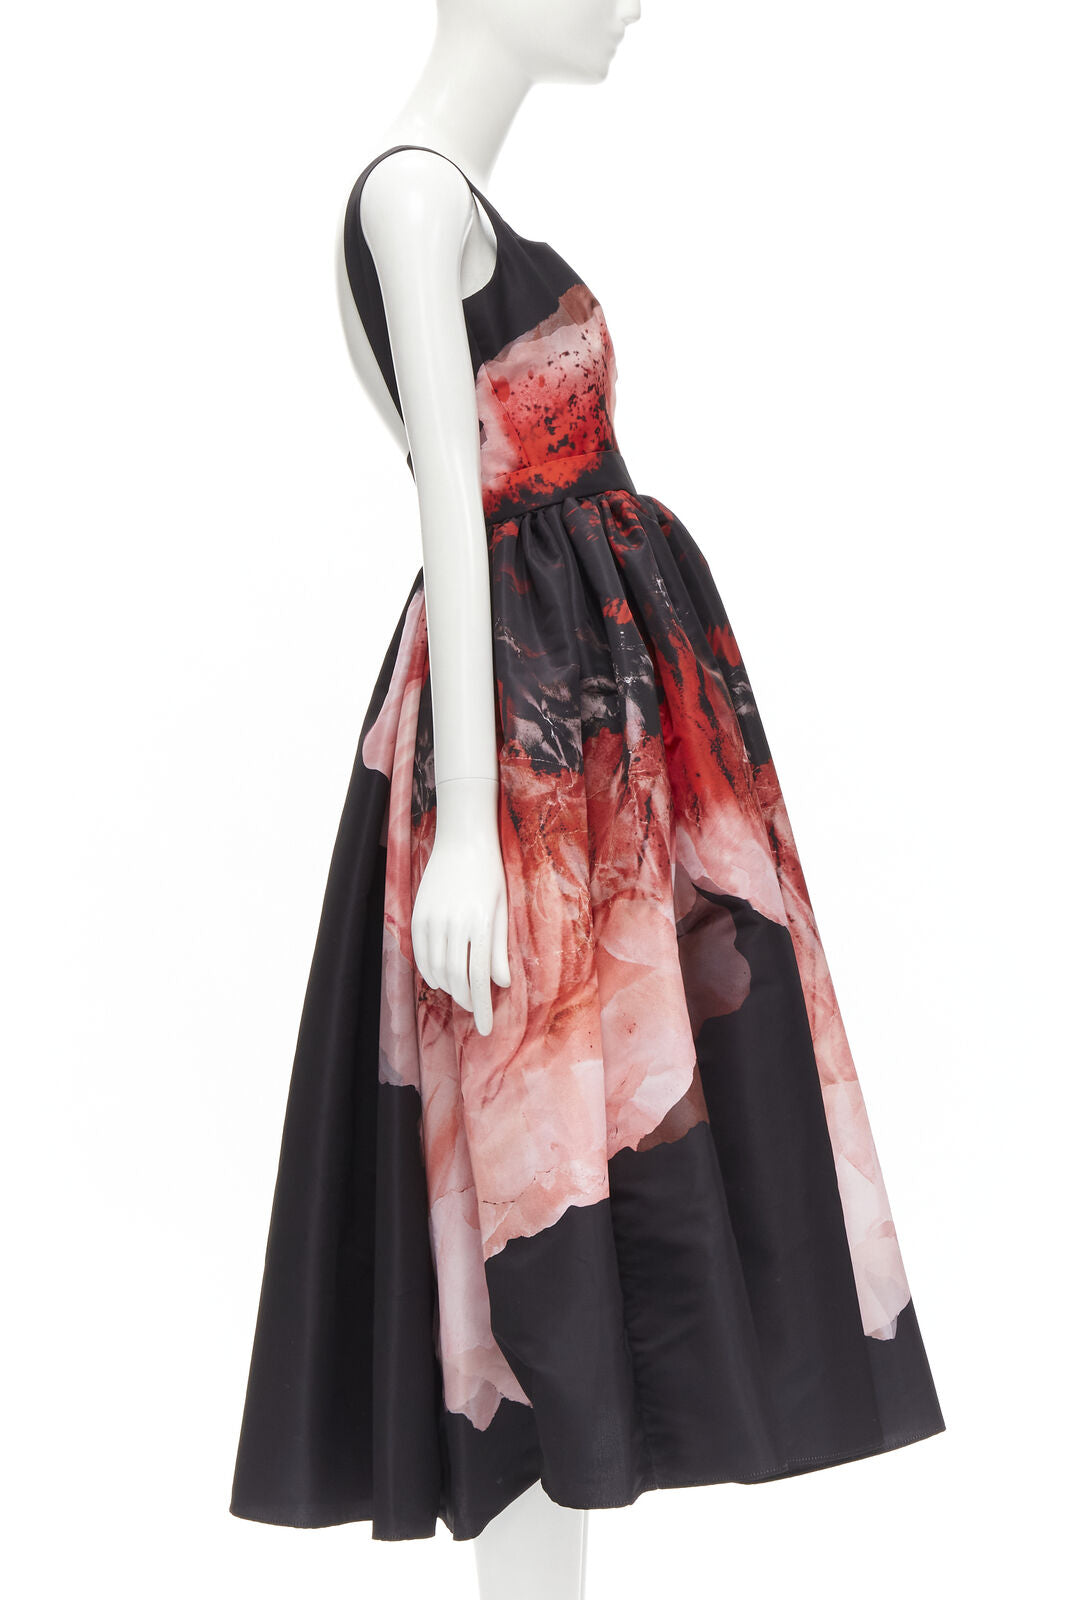 ALEXANDER MCQUEEN 2021 Runway Anemone black red floral full gown IT38 S